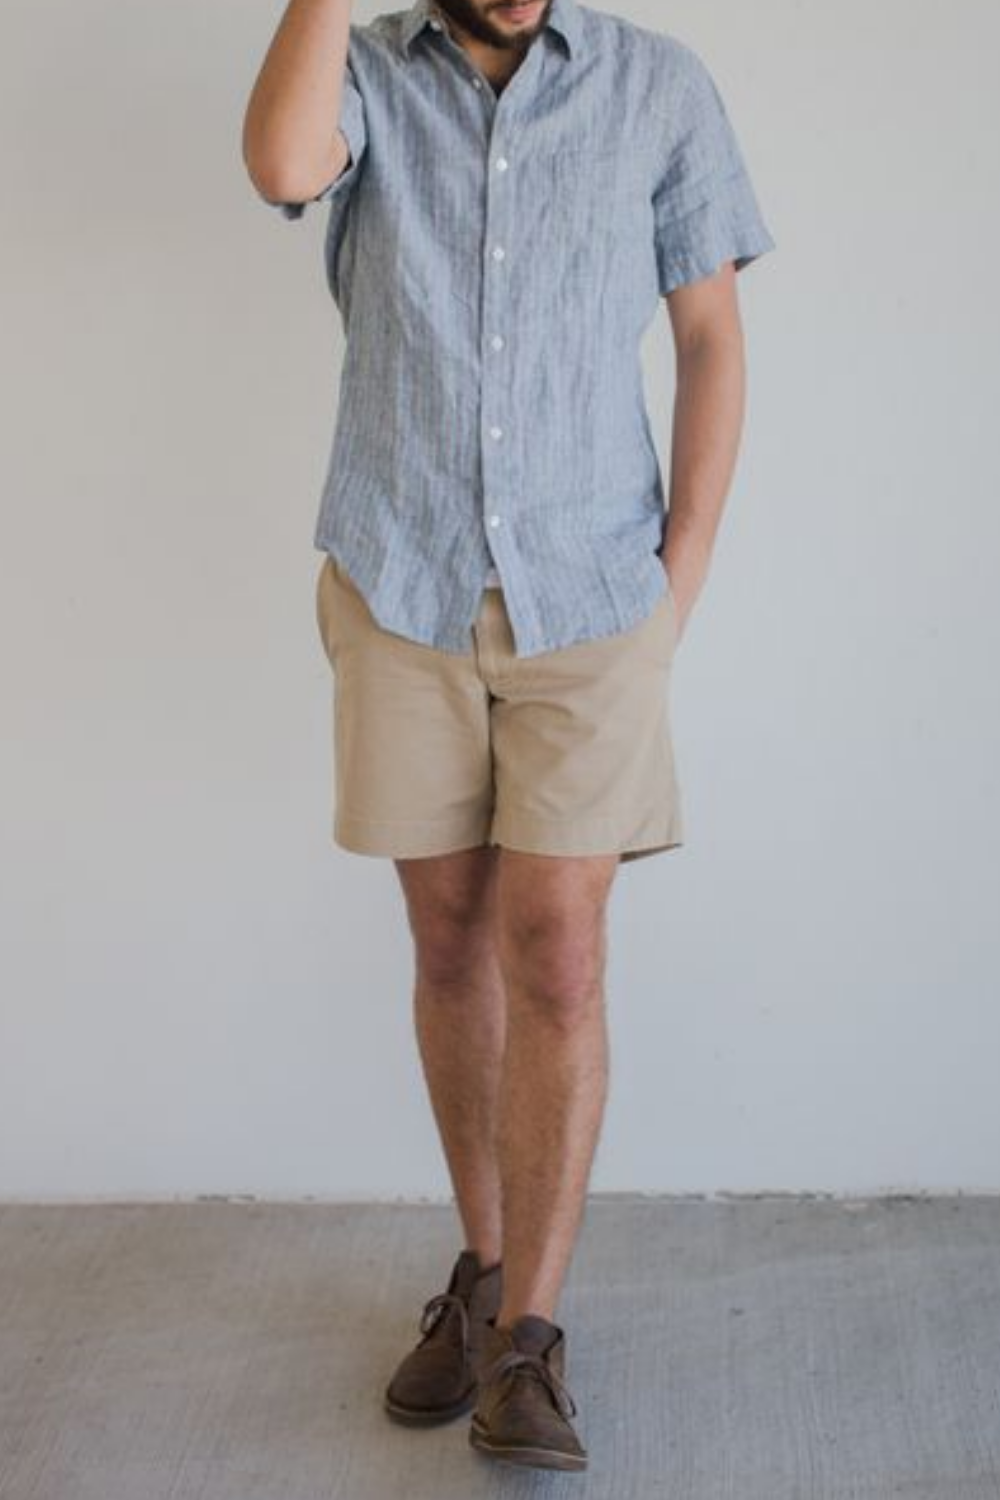 desert boot with shorts (1)